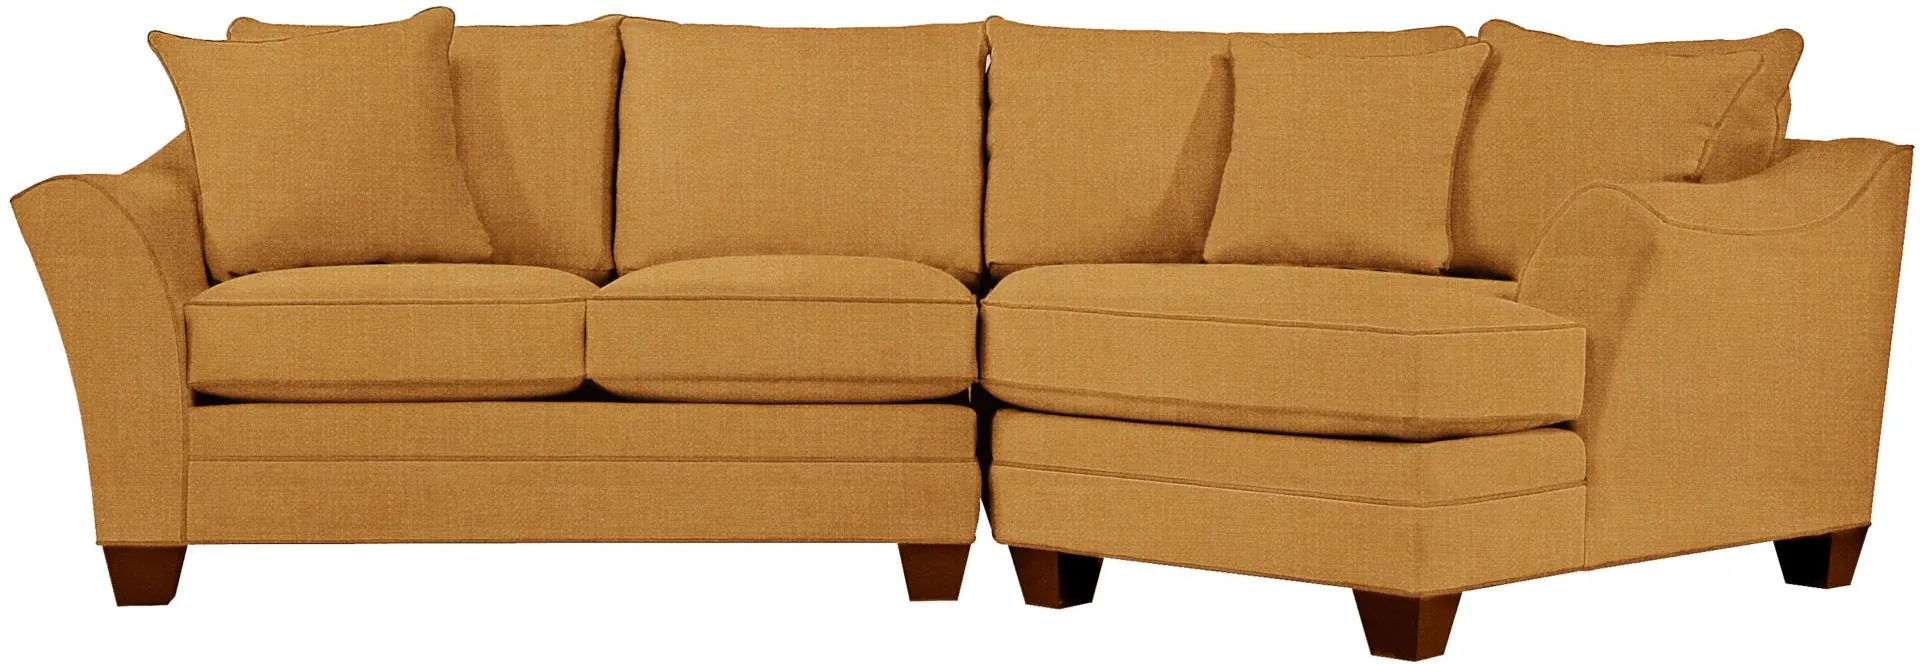 Foresthill 2-pc. Right Hand Cuddler Sectional Sofa in Elliot Sunflower by H.M. Richards